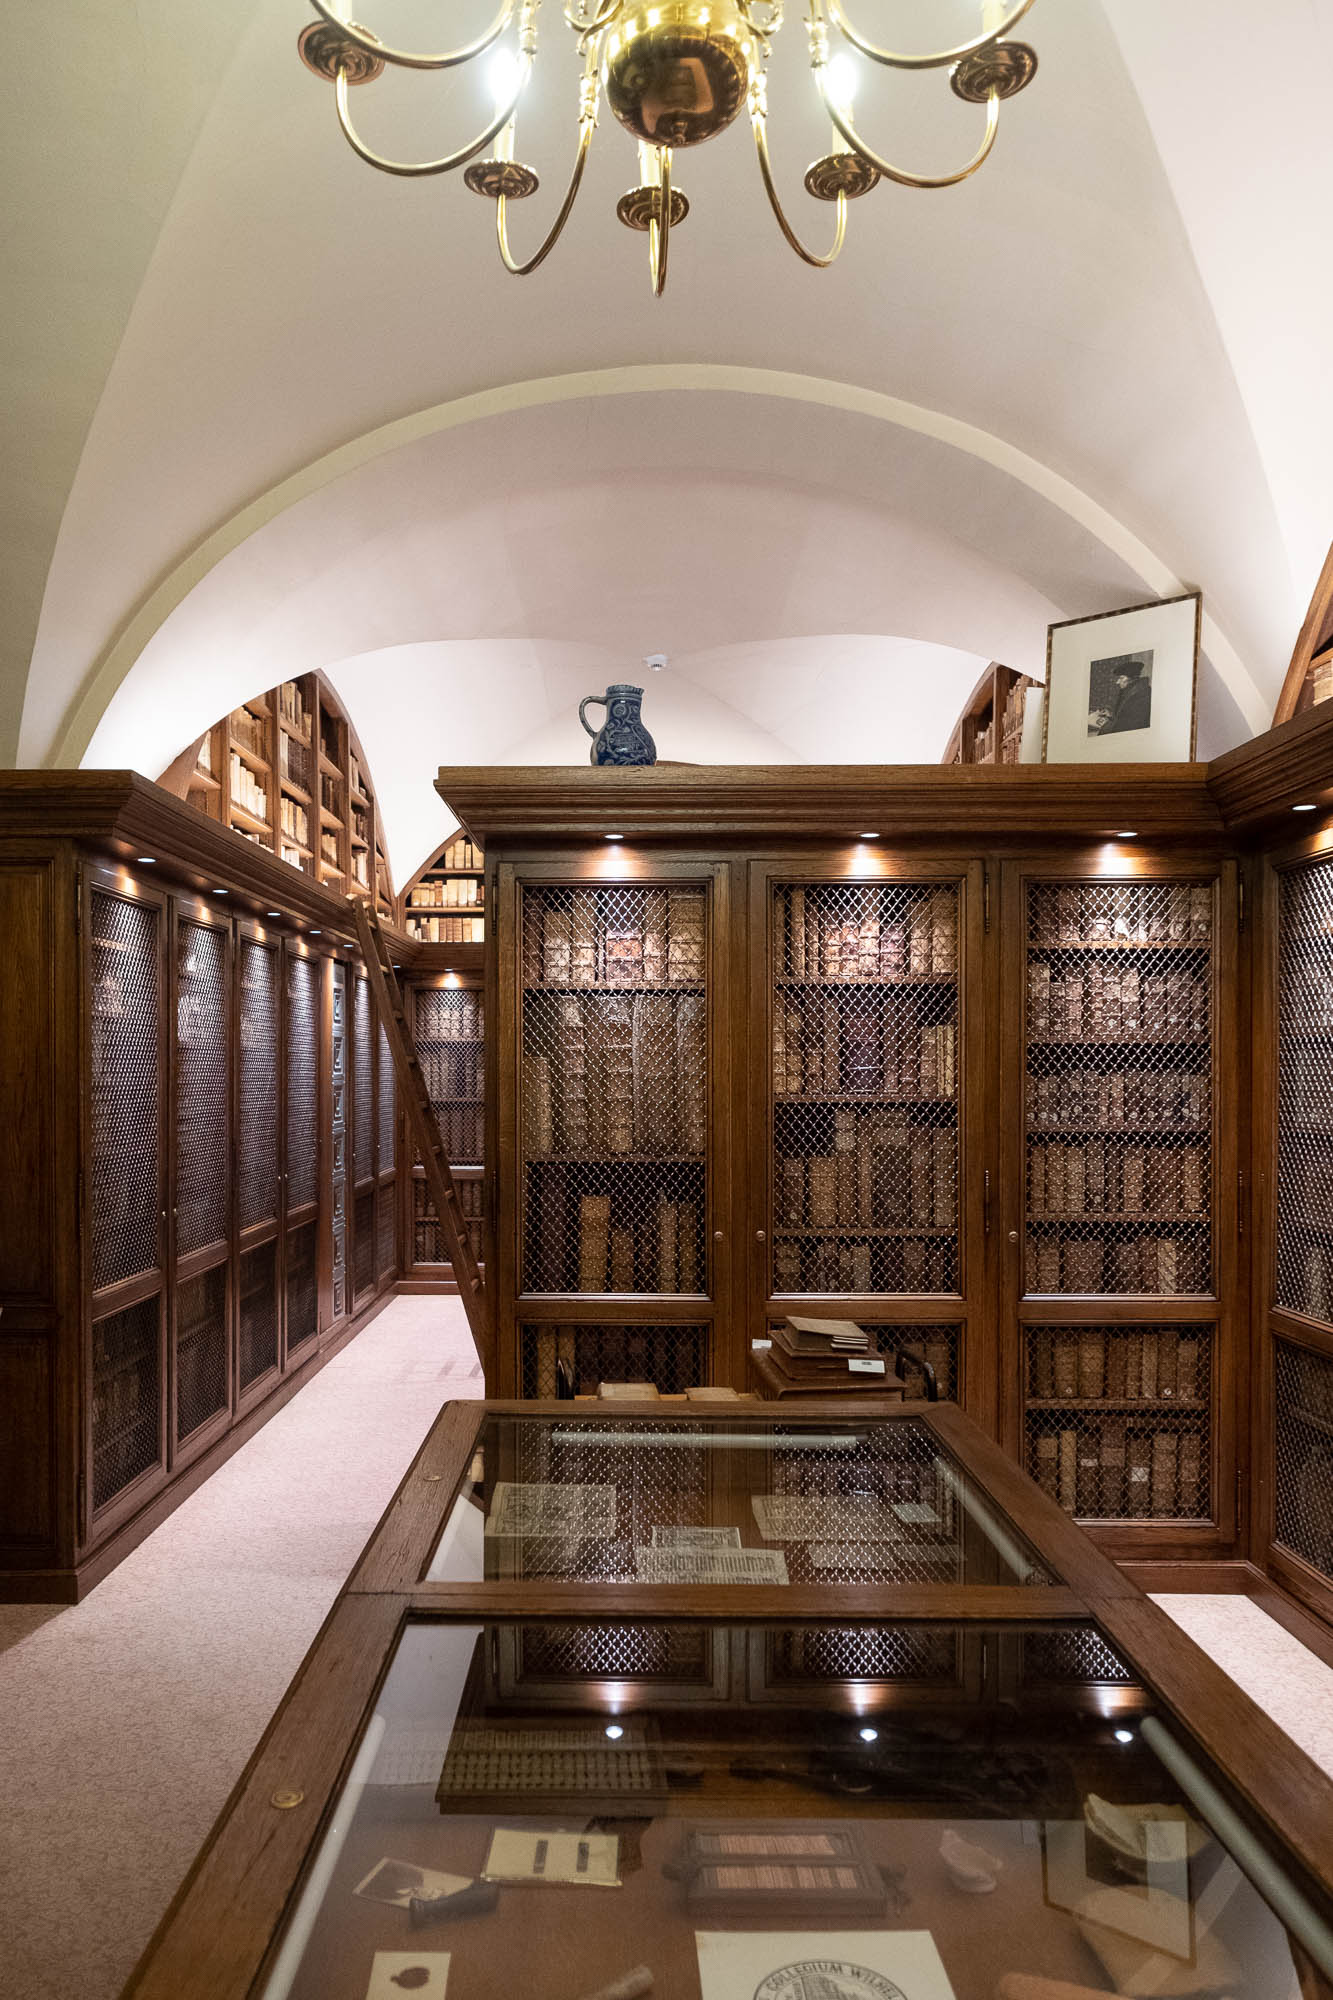 Interior of a rare book library with dark wood shelves filled with precious volumes behind protective netting. Glass-topped display cases are seen in the foreground.